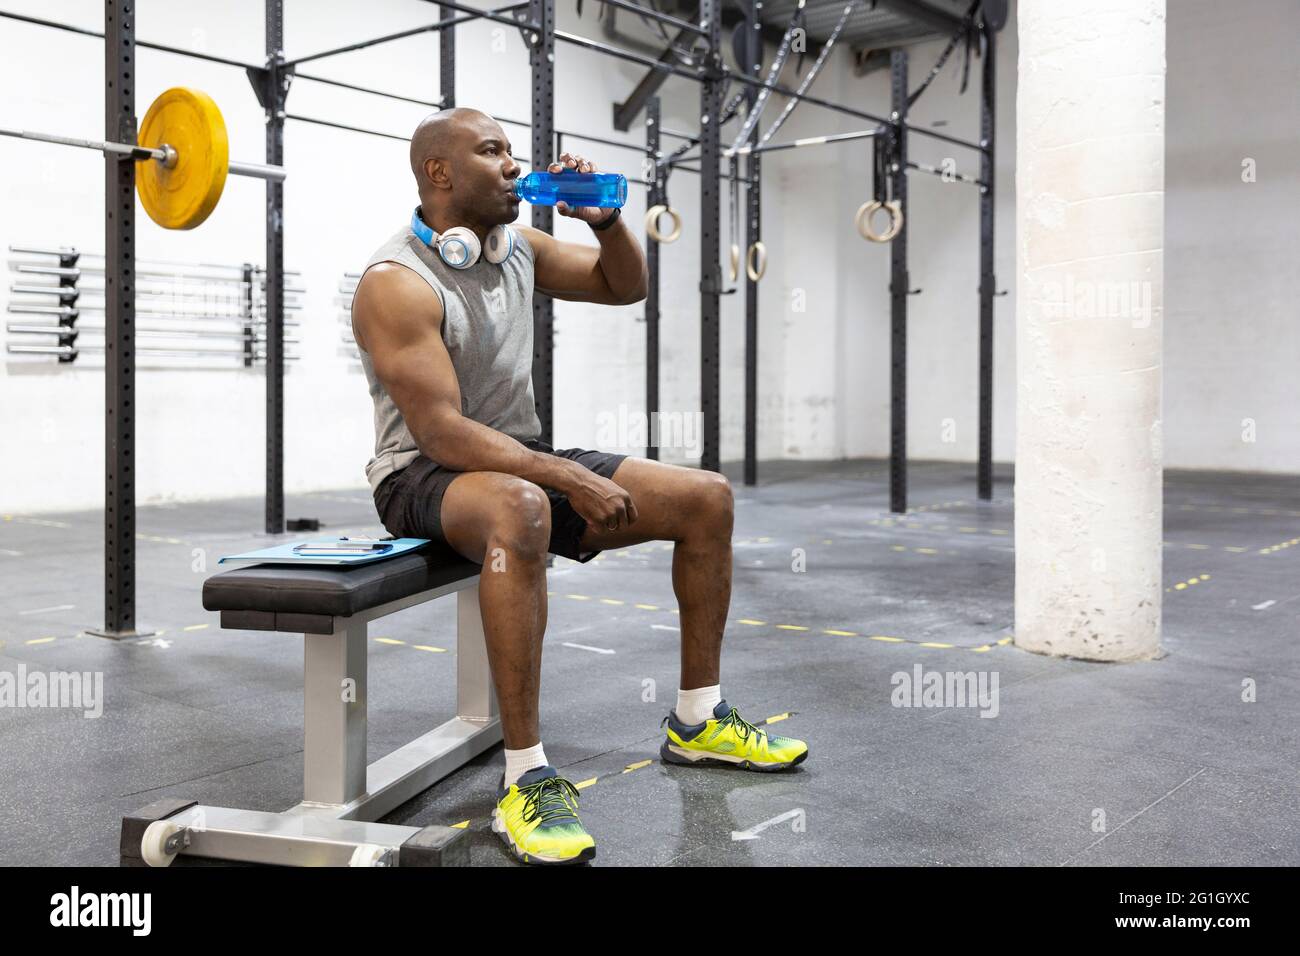 African American man hydrating after exercise in fitness center. Space for text. Stock Photo